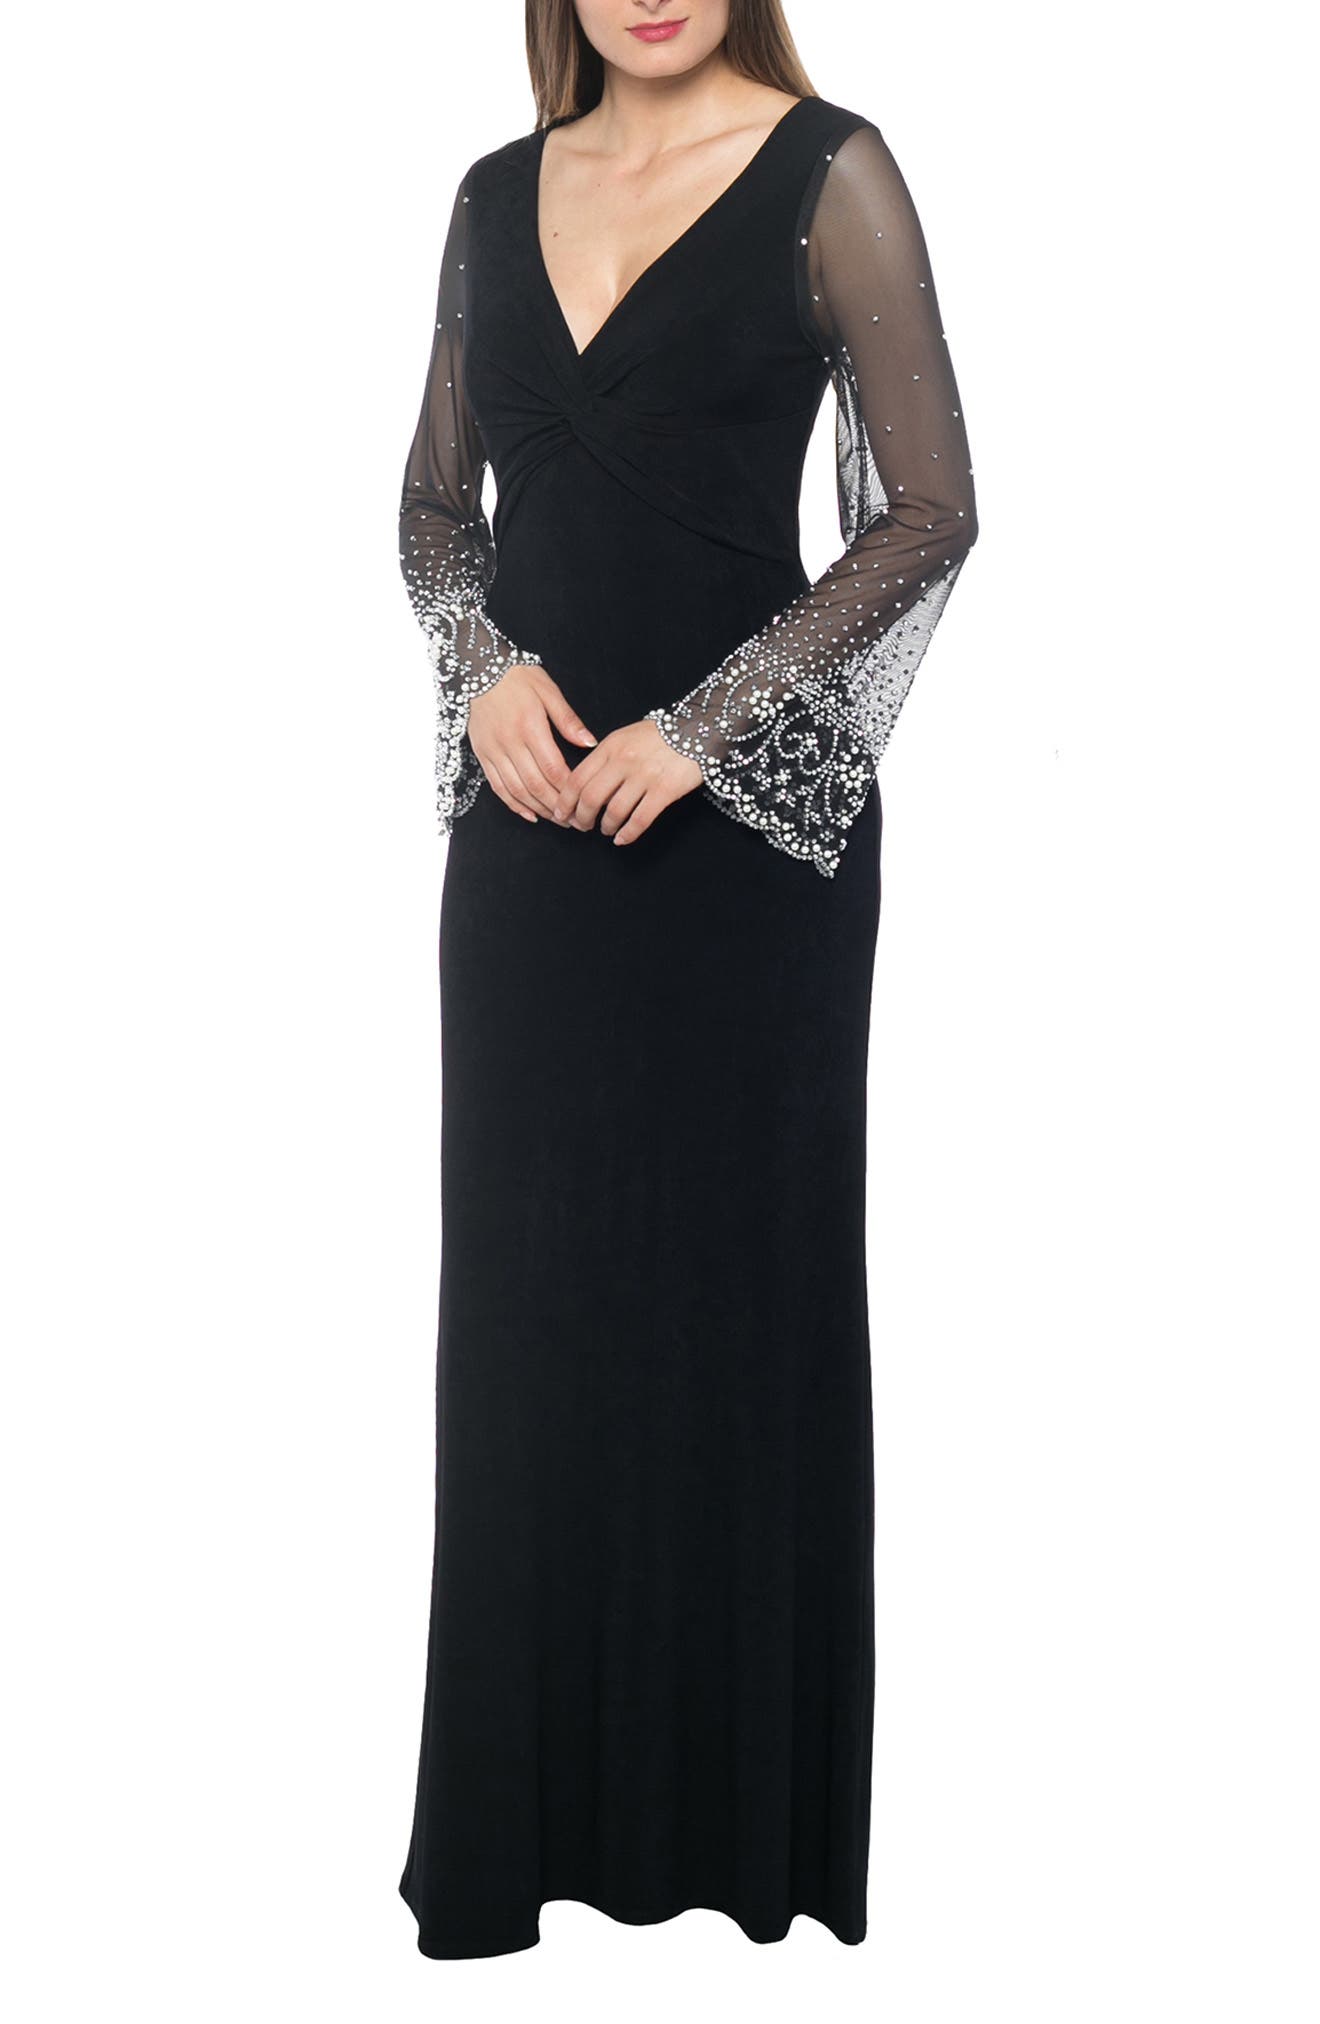 1920s Downton Abbey Dresses Marina Beaded Sheer Sleeve Gown in Black at Nordstrom Rack Size 14 $96.97 AT vintagedancer.com